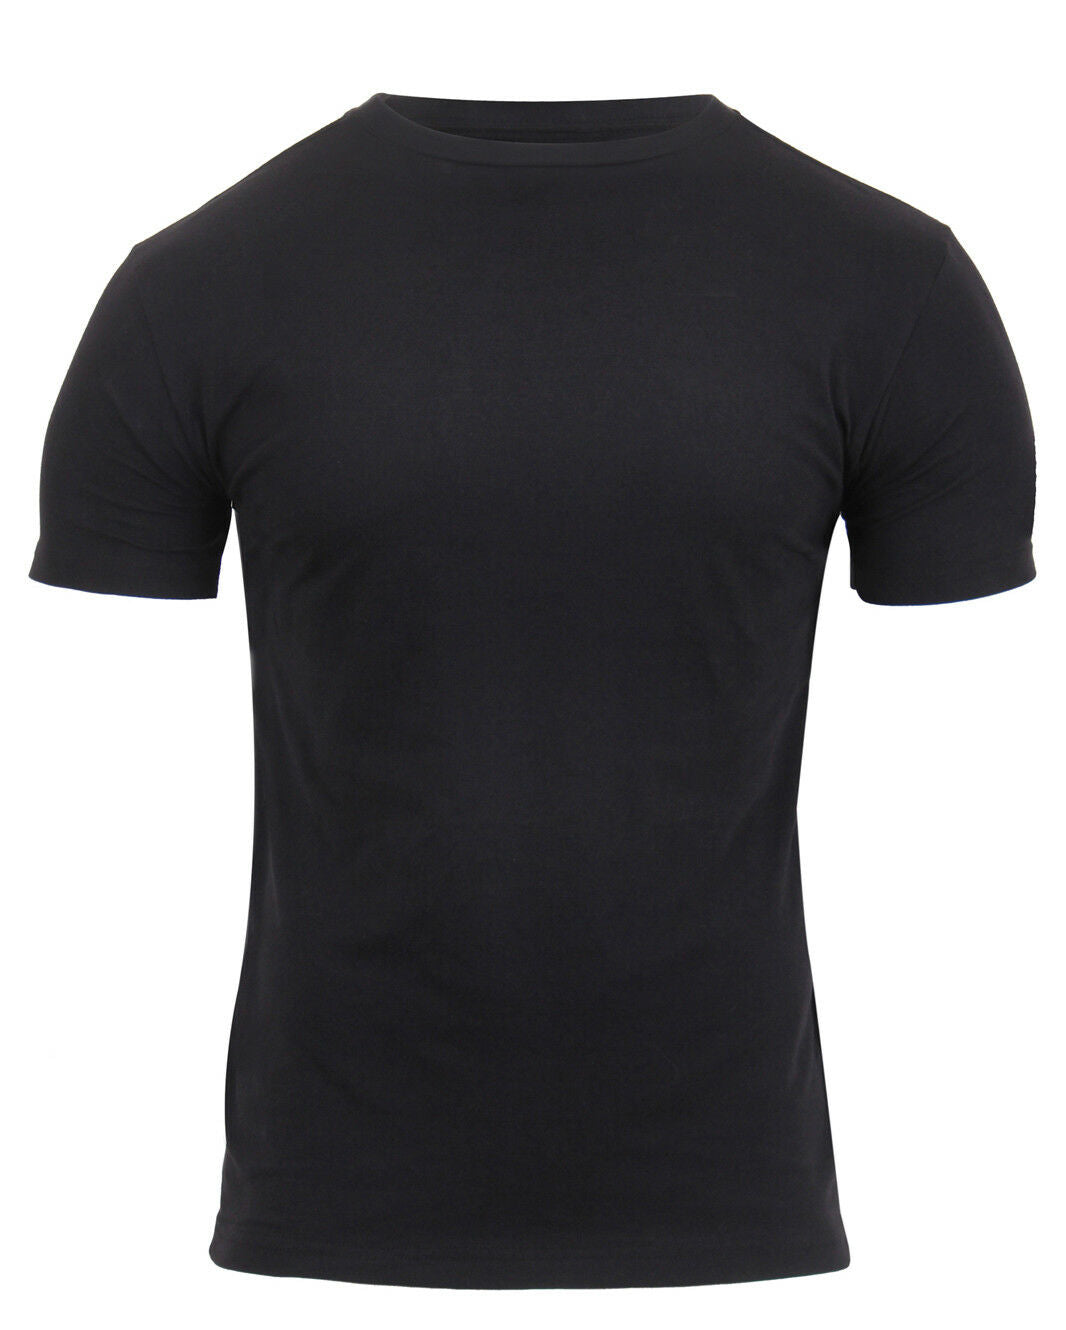 Rothco Athletic Fit Solid Color Military T-Shirt - Black